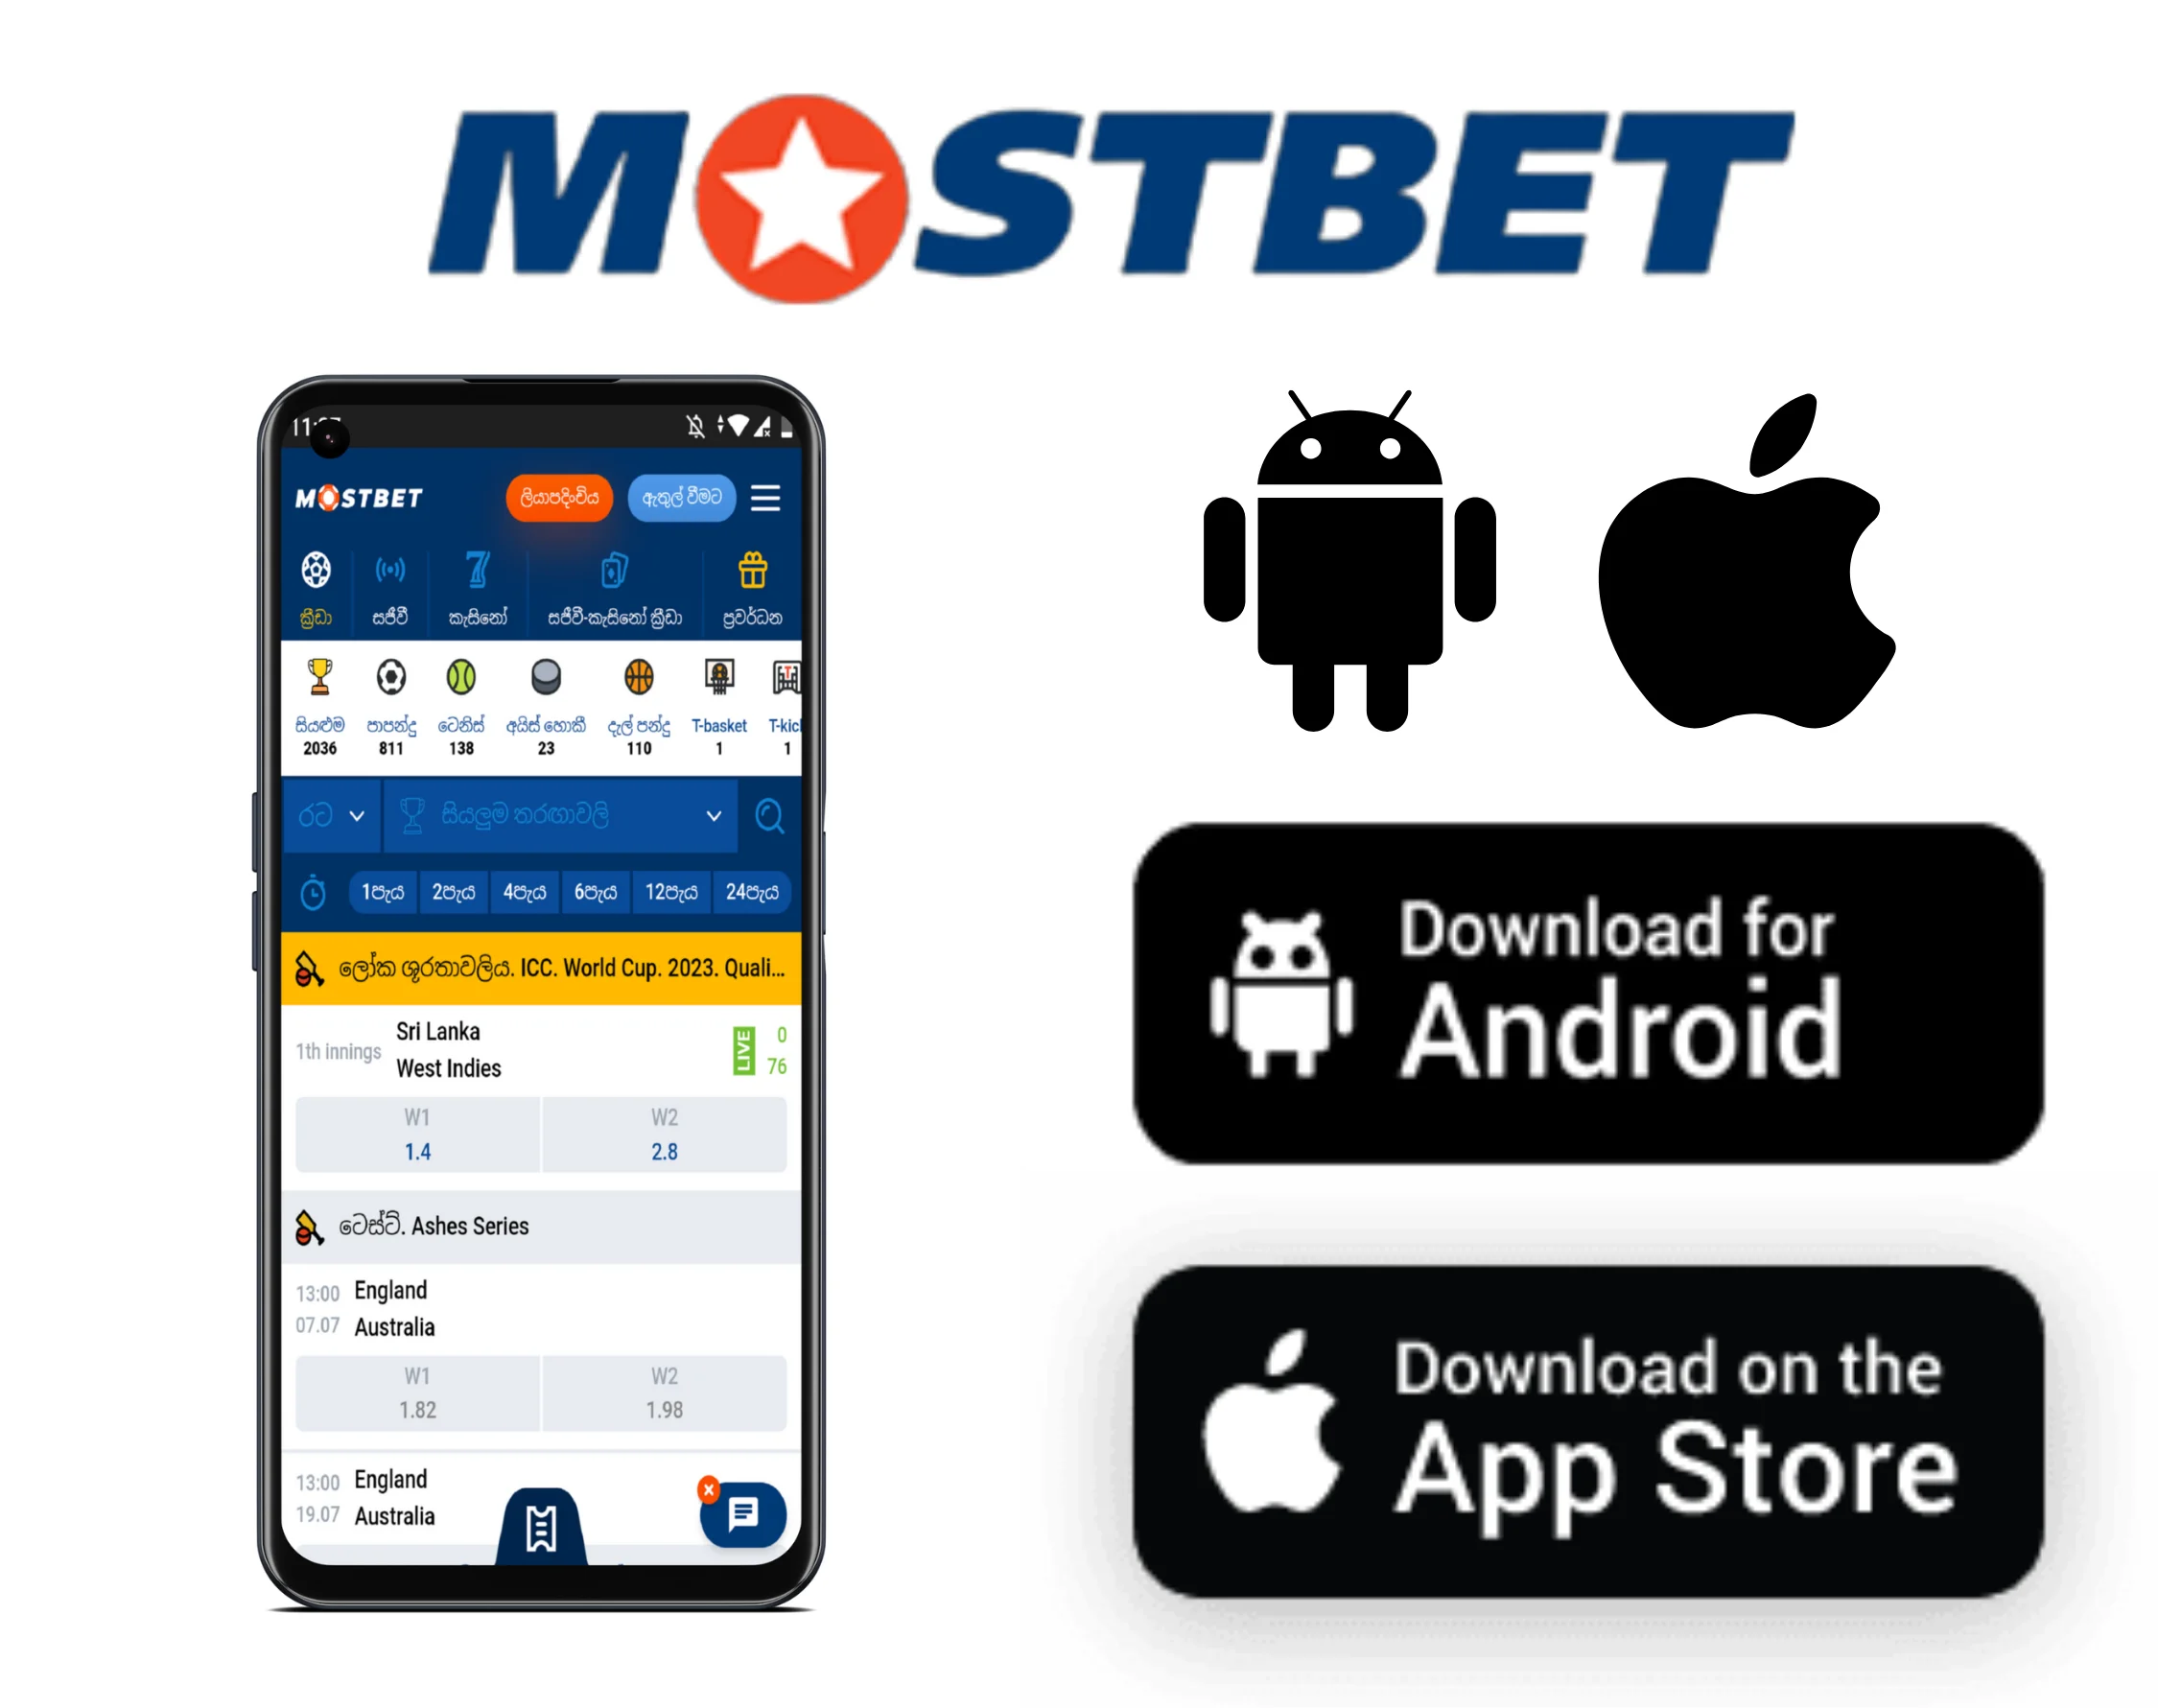 10 Reasons Why Having An Excellent Mostbet offers an exhilarating platform for those passionate about online betting. With its wide range of betting options, live betting features, and high winning odds, it provides a comprehensive and thrilling betting experience. Whether you're looking t Is Not Enough